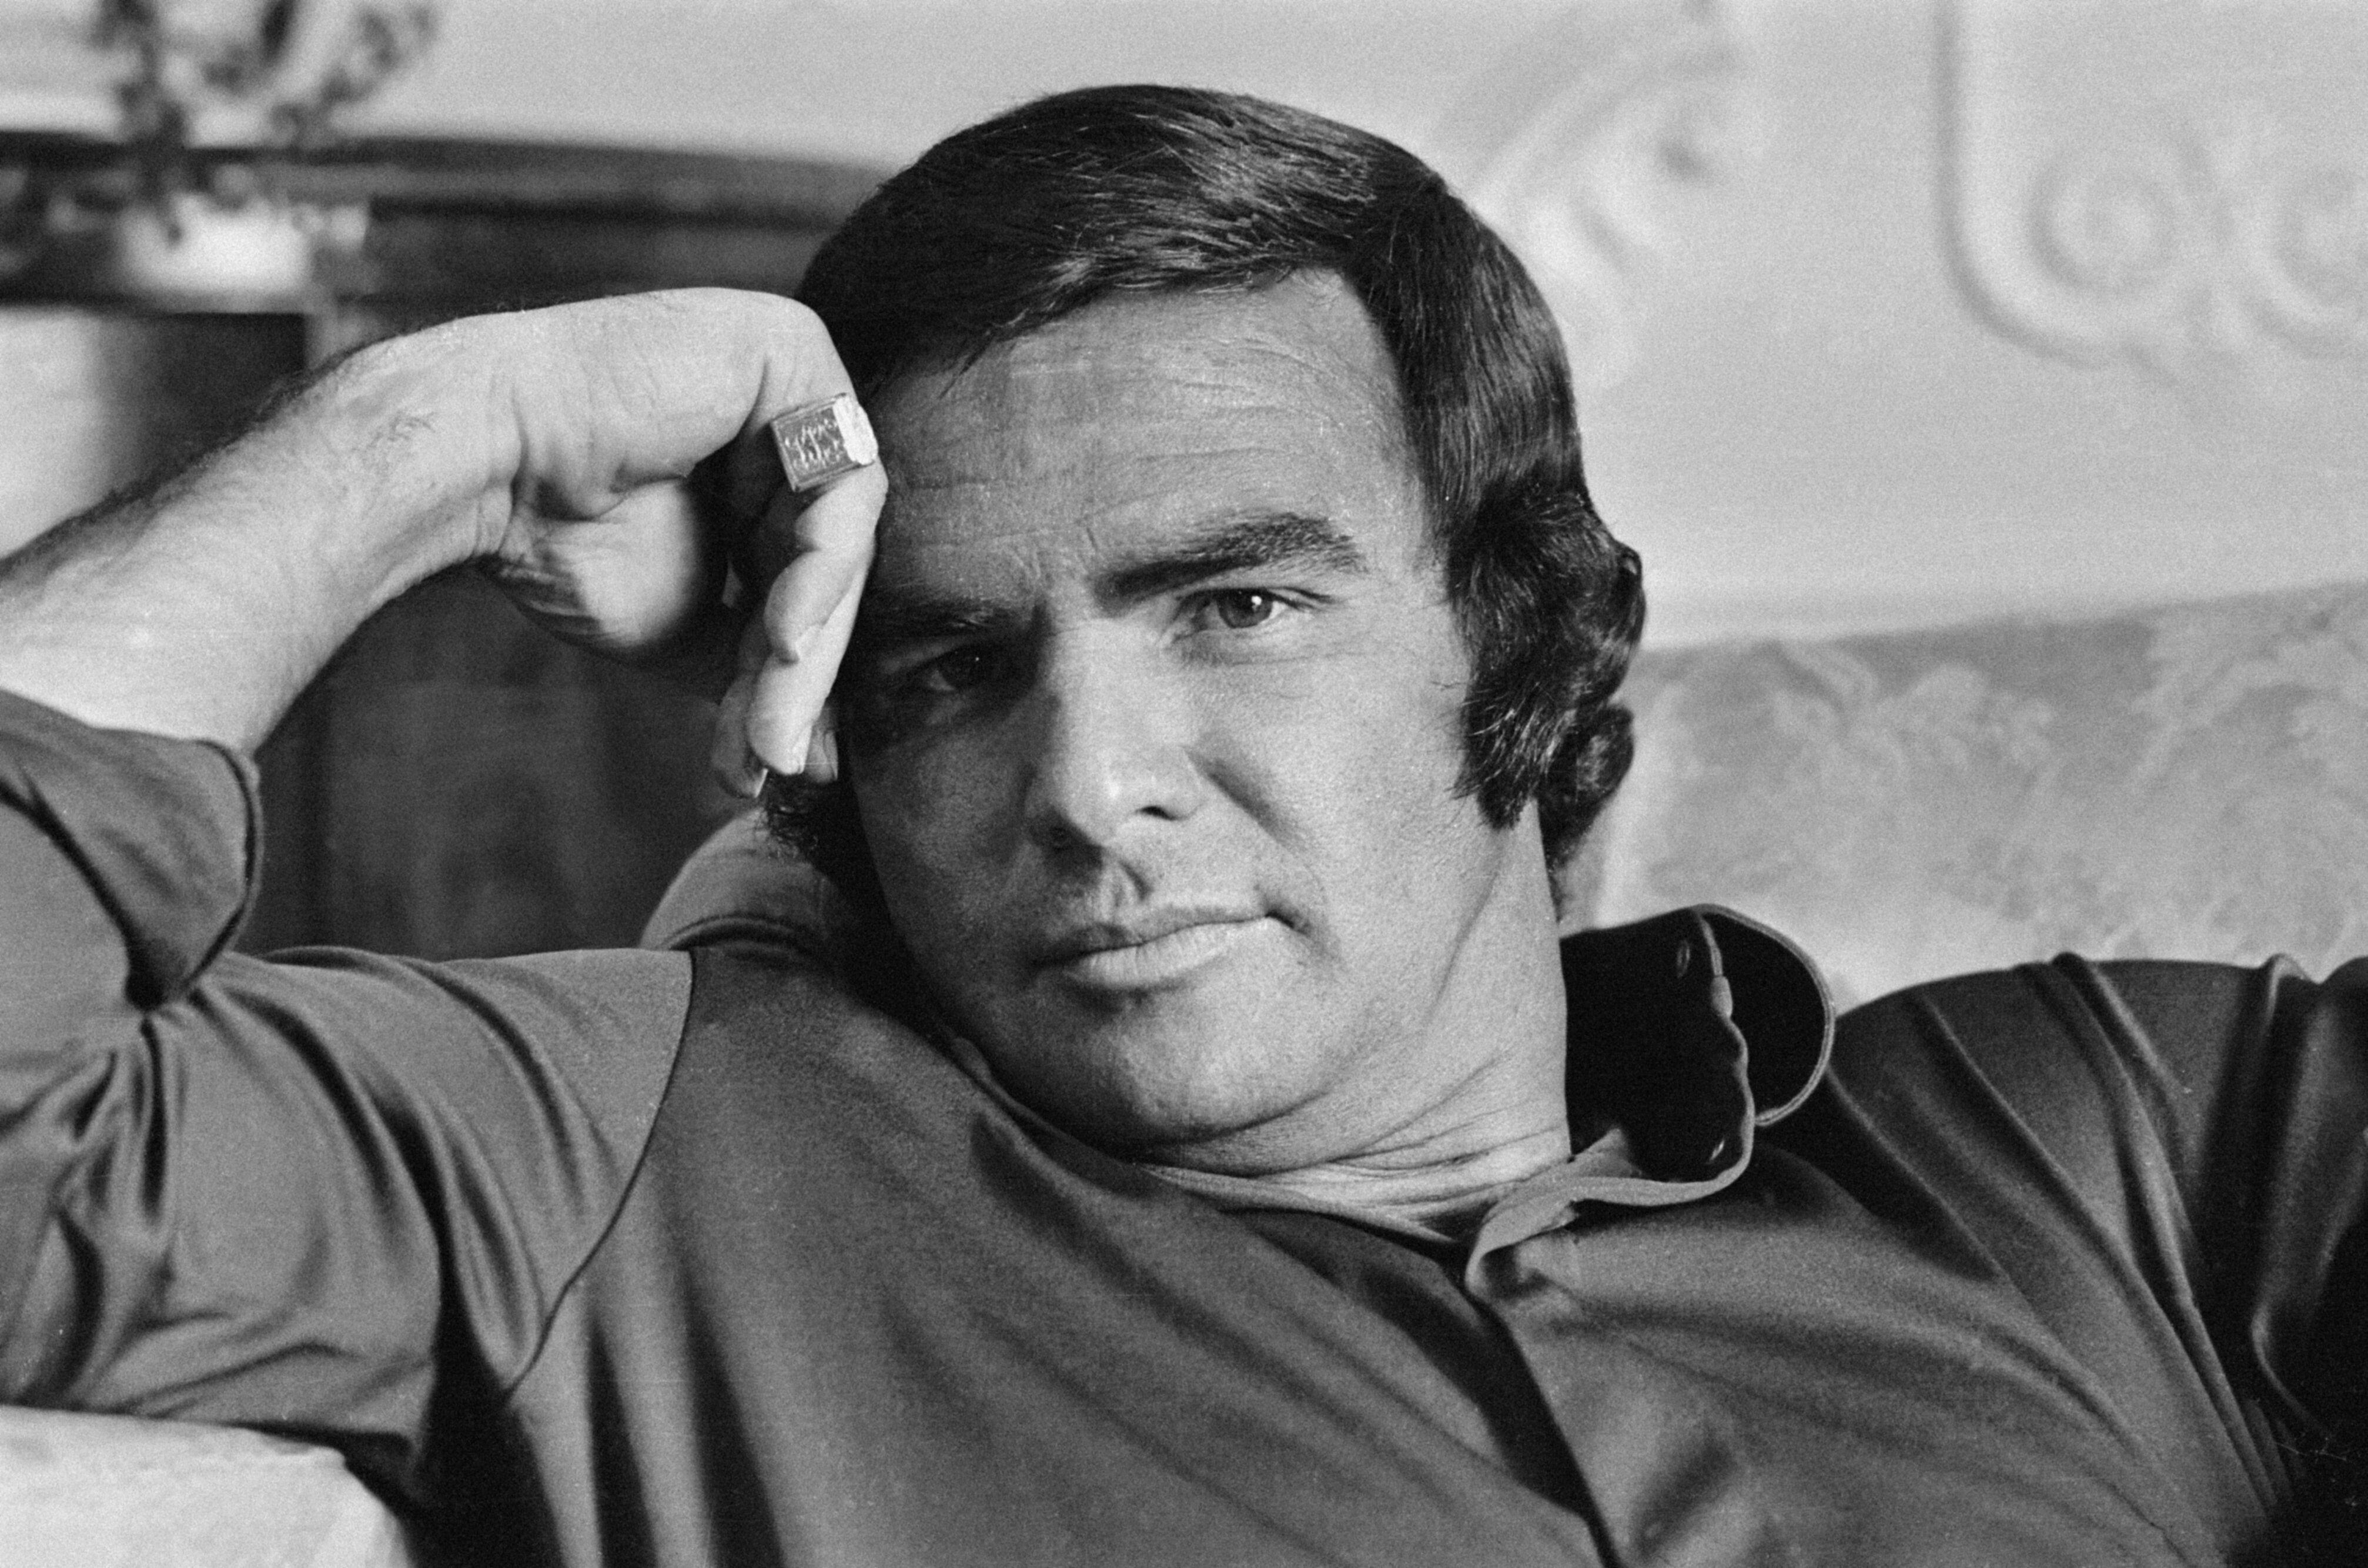 Film star Burt Reynolds in relaxed mood. | Source: Getty Images